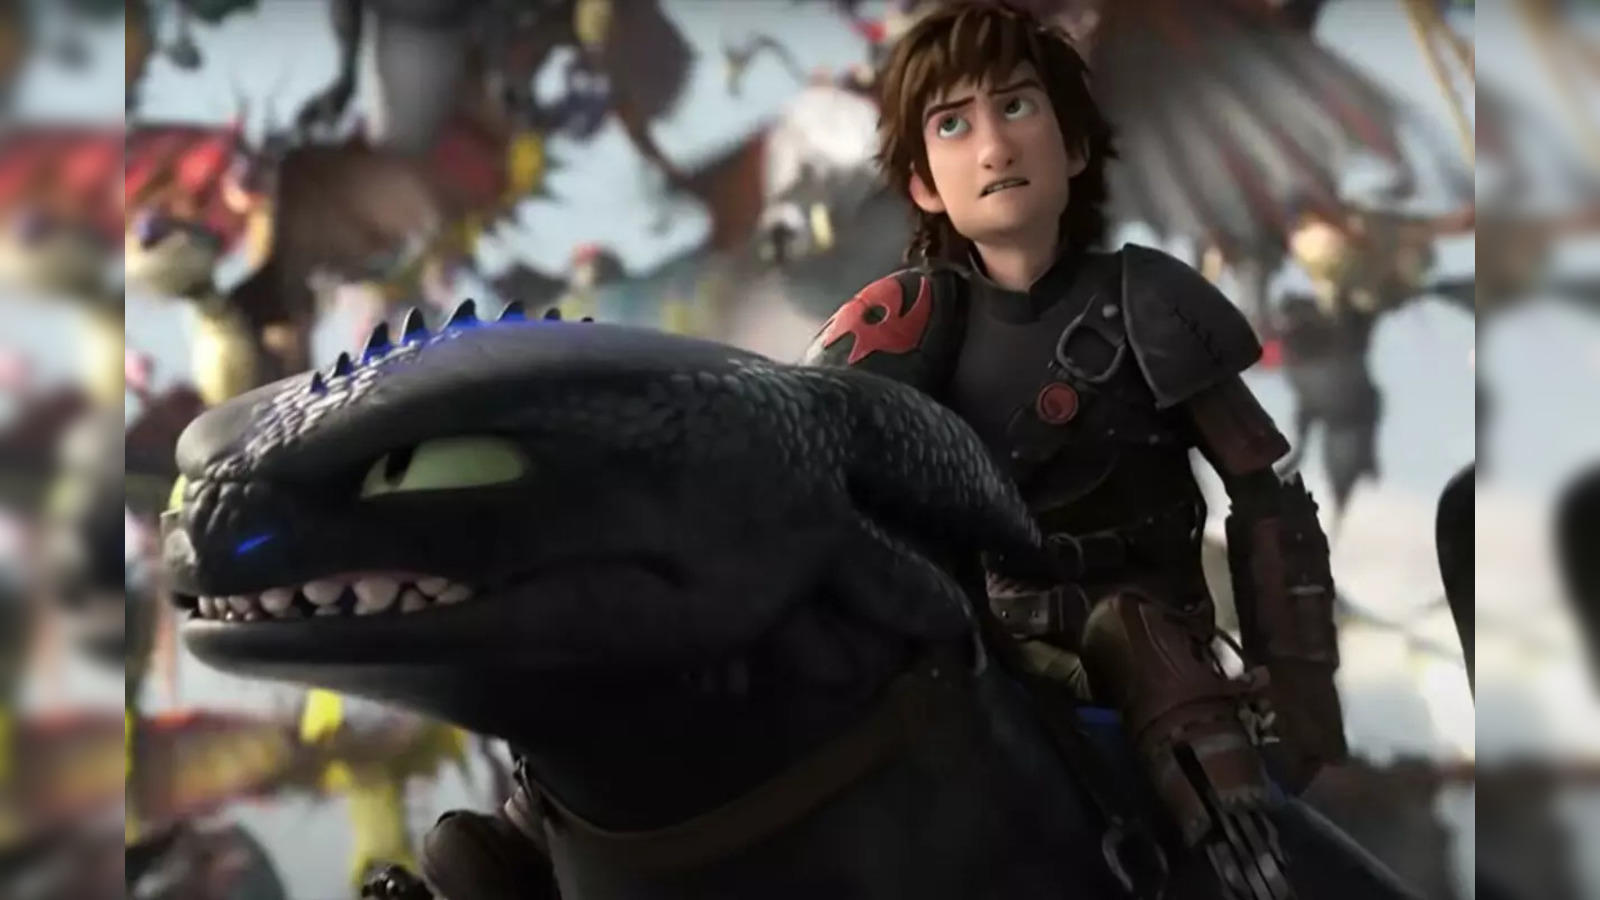 How To Train Your Dragon Live-Action Movie: How To Train Your Dragon  Live-Action Movie: See release date, cast and plot - The Economic Times